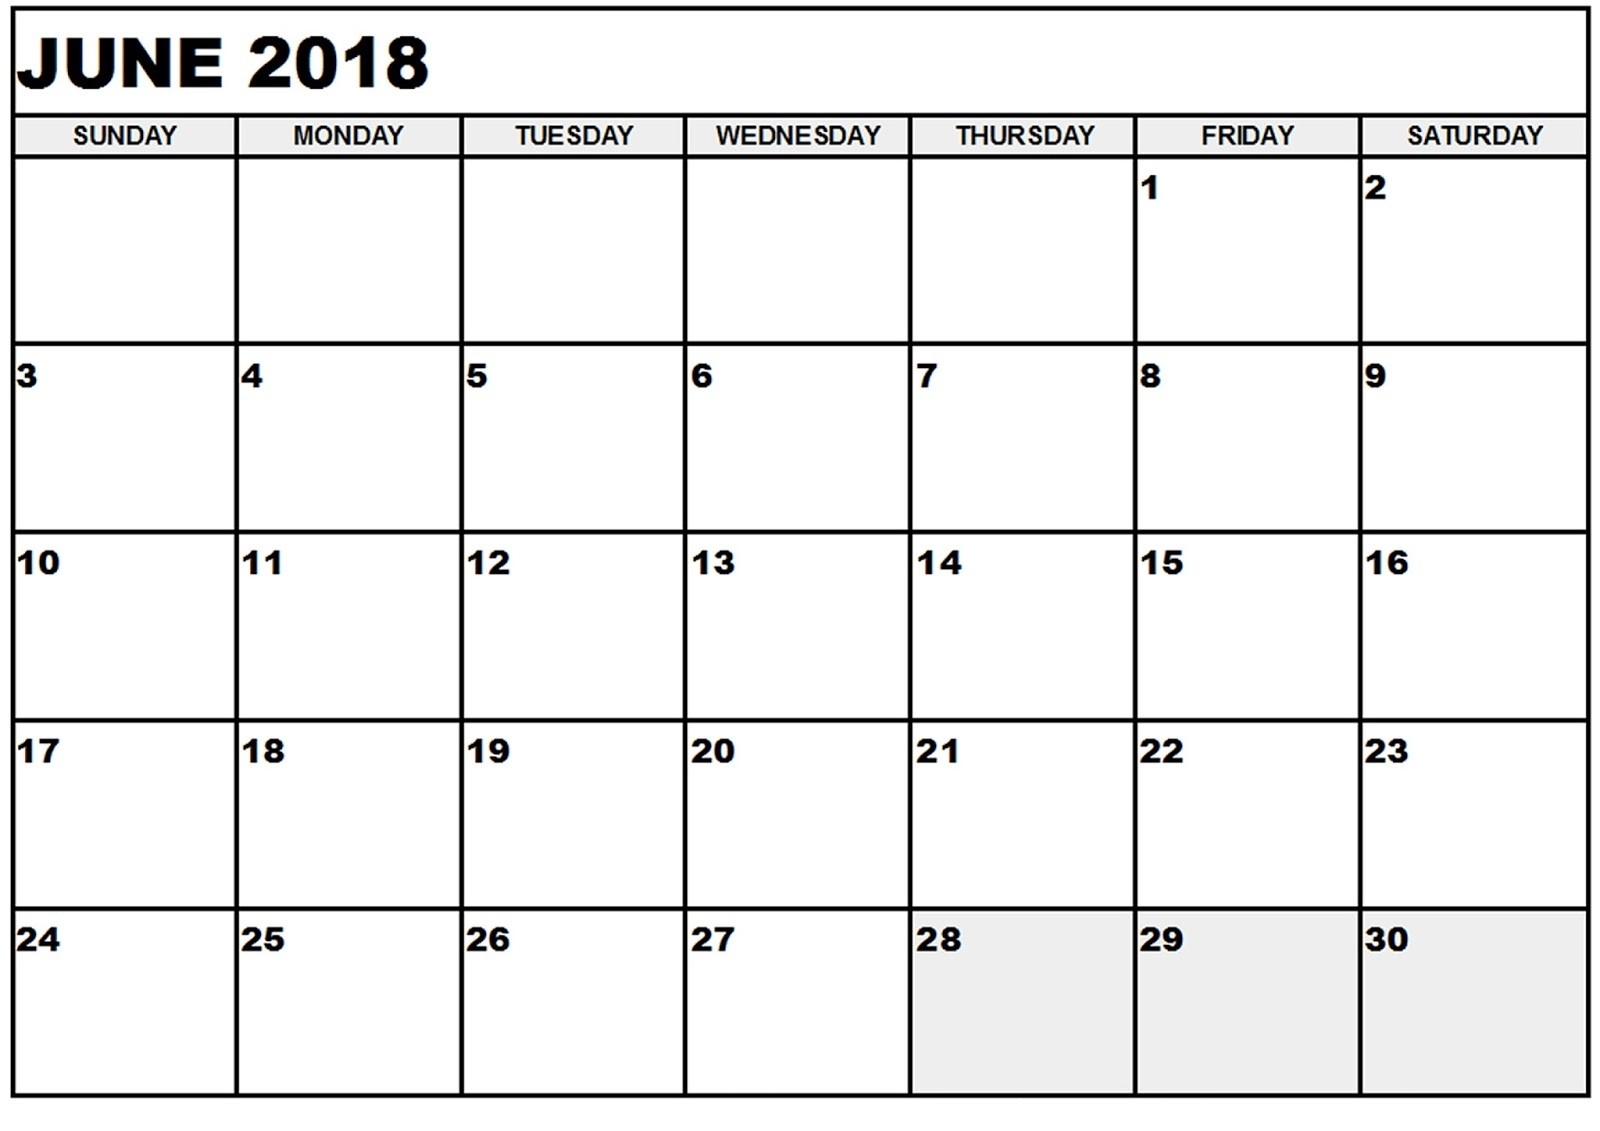 Printable Calendar You Can Type Into | Printable Calendar 2019-Blank Calender Template That I Can Type In